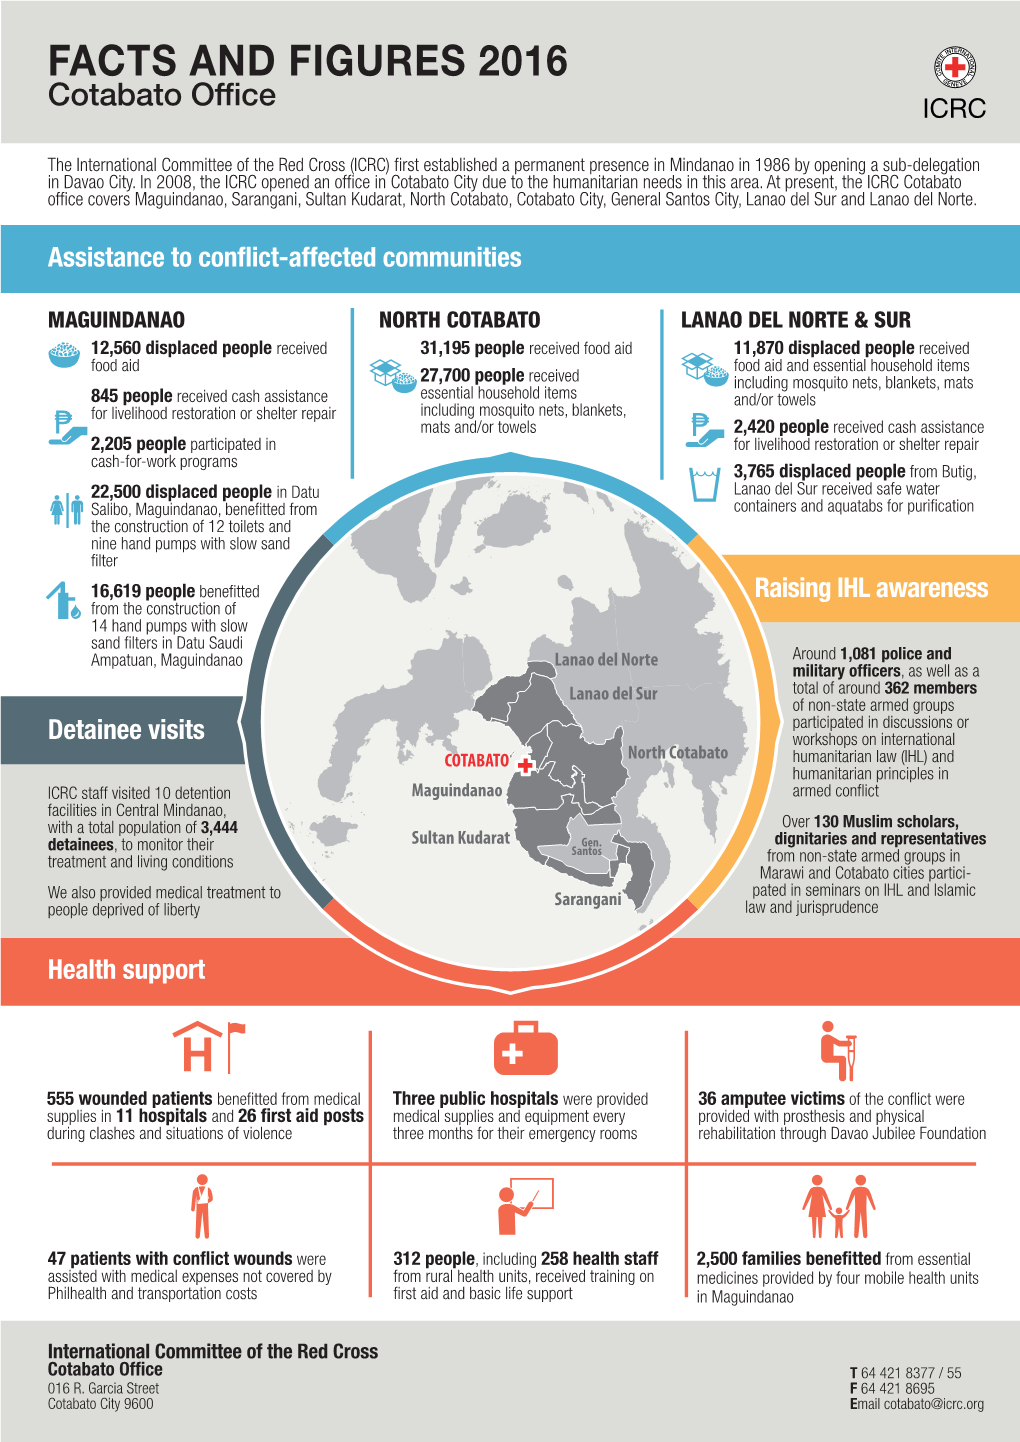 ICRC Cotabato Facts and Figures 2016